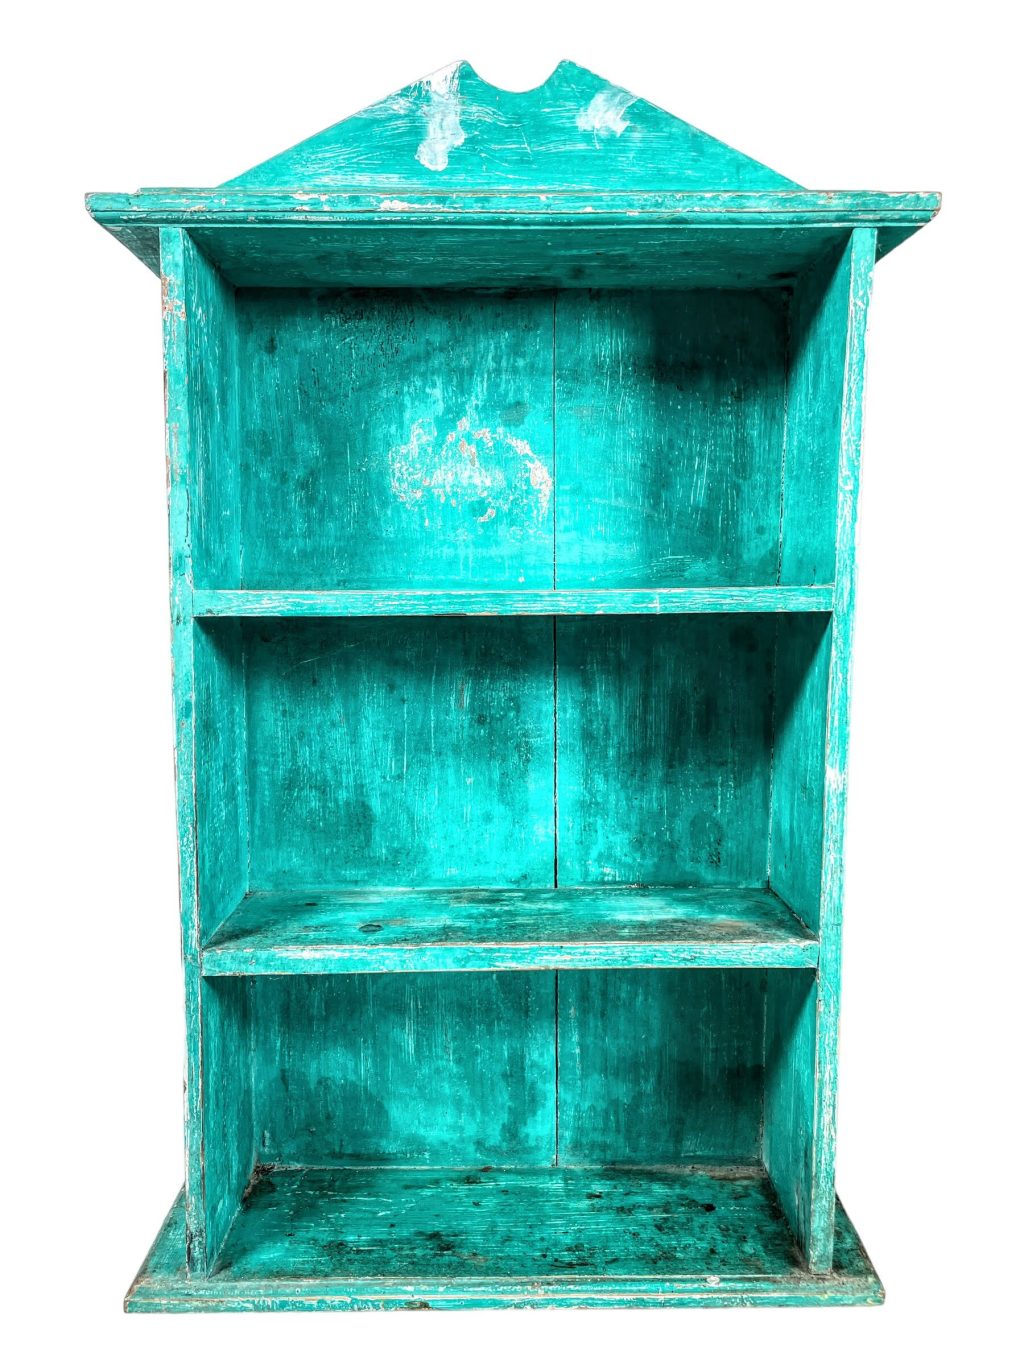 Vintage French Wooden Triple Shelf Painted Aqua Blue Green Shabby Chic Stand Display Shelfs Wall Hanging Or Standing circa 1960-70’s